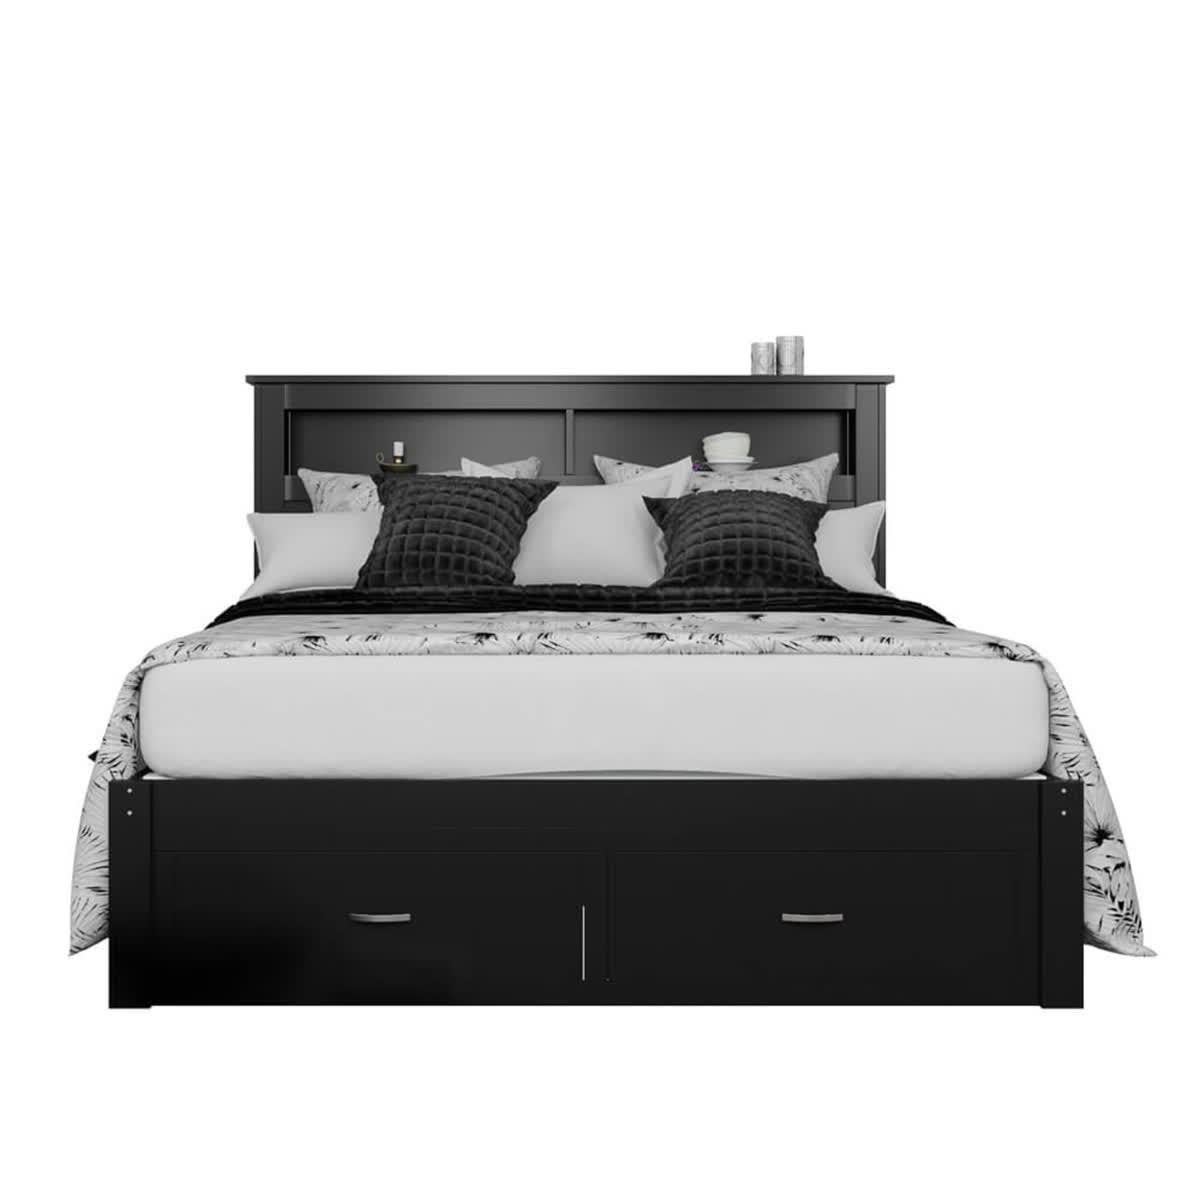 Porcia Timber Bed with Storage Shelves & Drawers - Black Black Queen